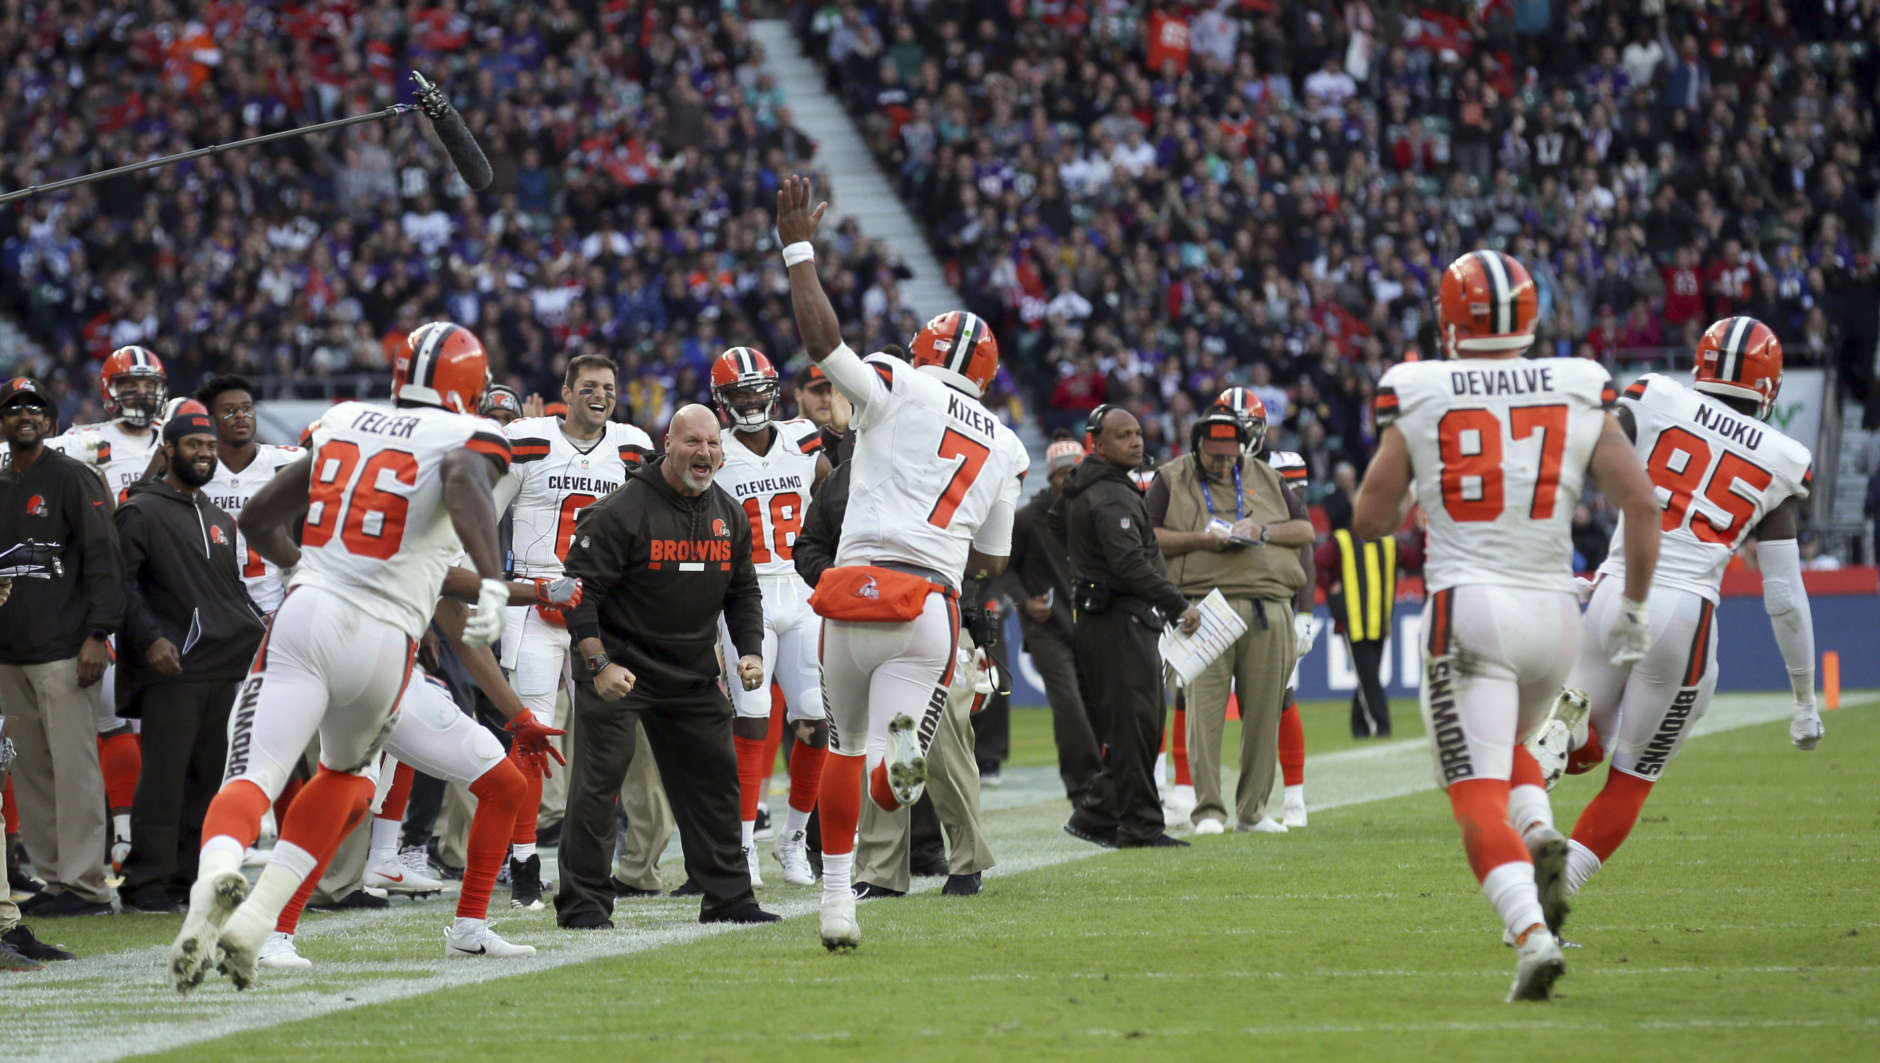 Cleveland Browns quarterback DeShone Kizer (7) celebrates with teammates after scoring on a 1-yard touchdown run during the first half of an NFL football game against the Minnesota Vikings at Twickenham Stadium in London, Sunday Oct. 29, 2017. (AP Photo/Tim Ireland)